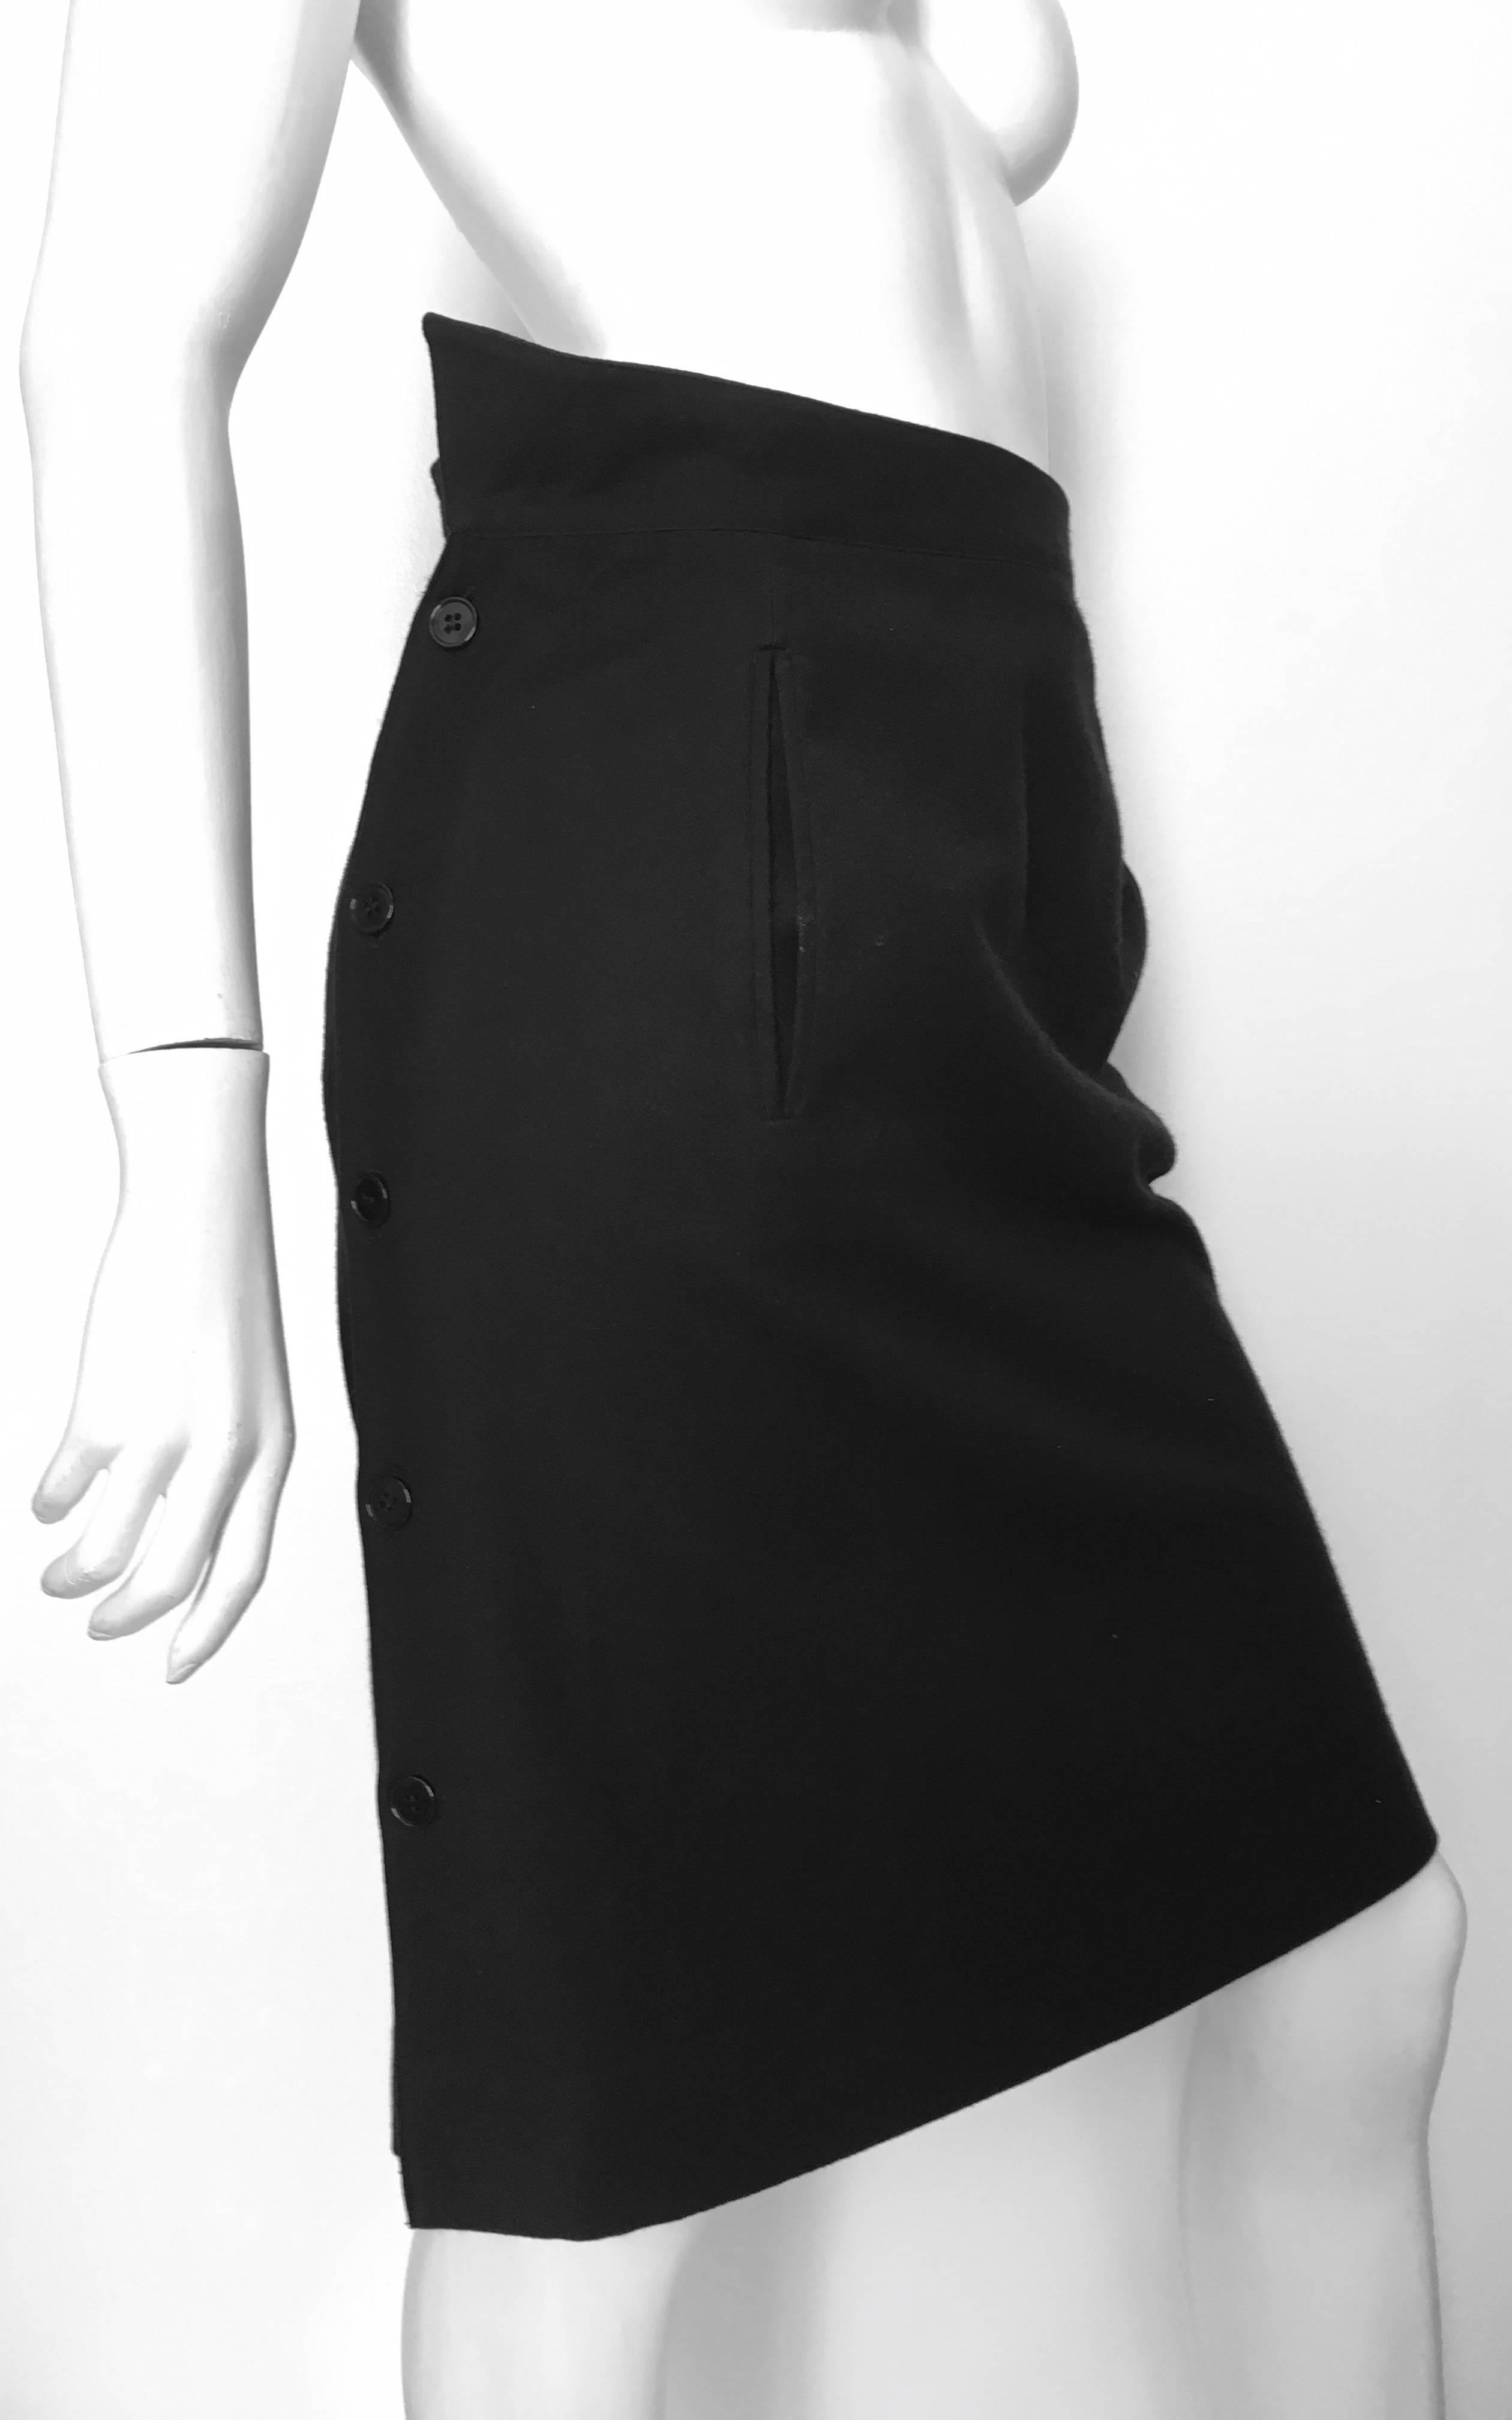 Gianfranco Ferre 1980s Black Wool Wrap Skirt with Pockets Size 6. In Excellent Condition For Sale In Atlanta, GA